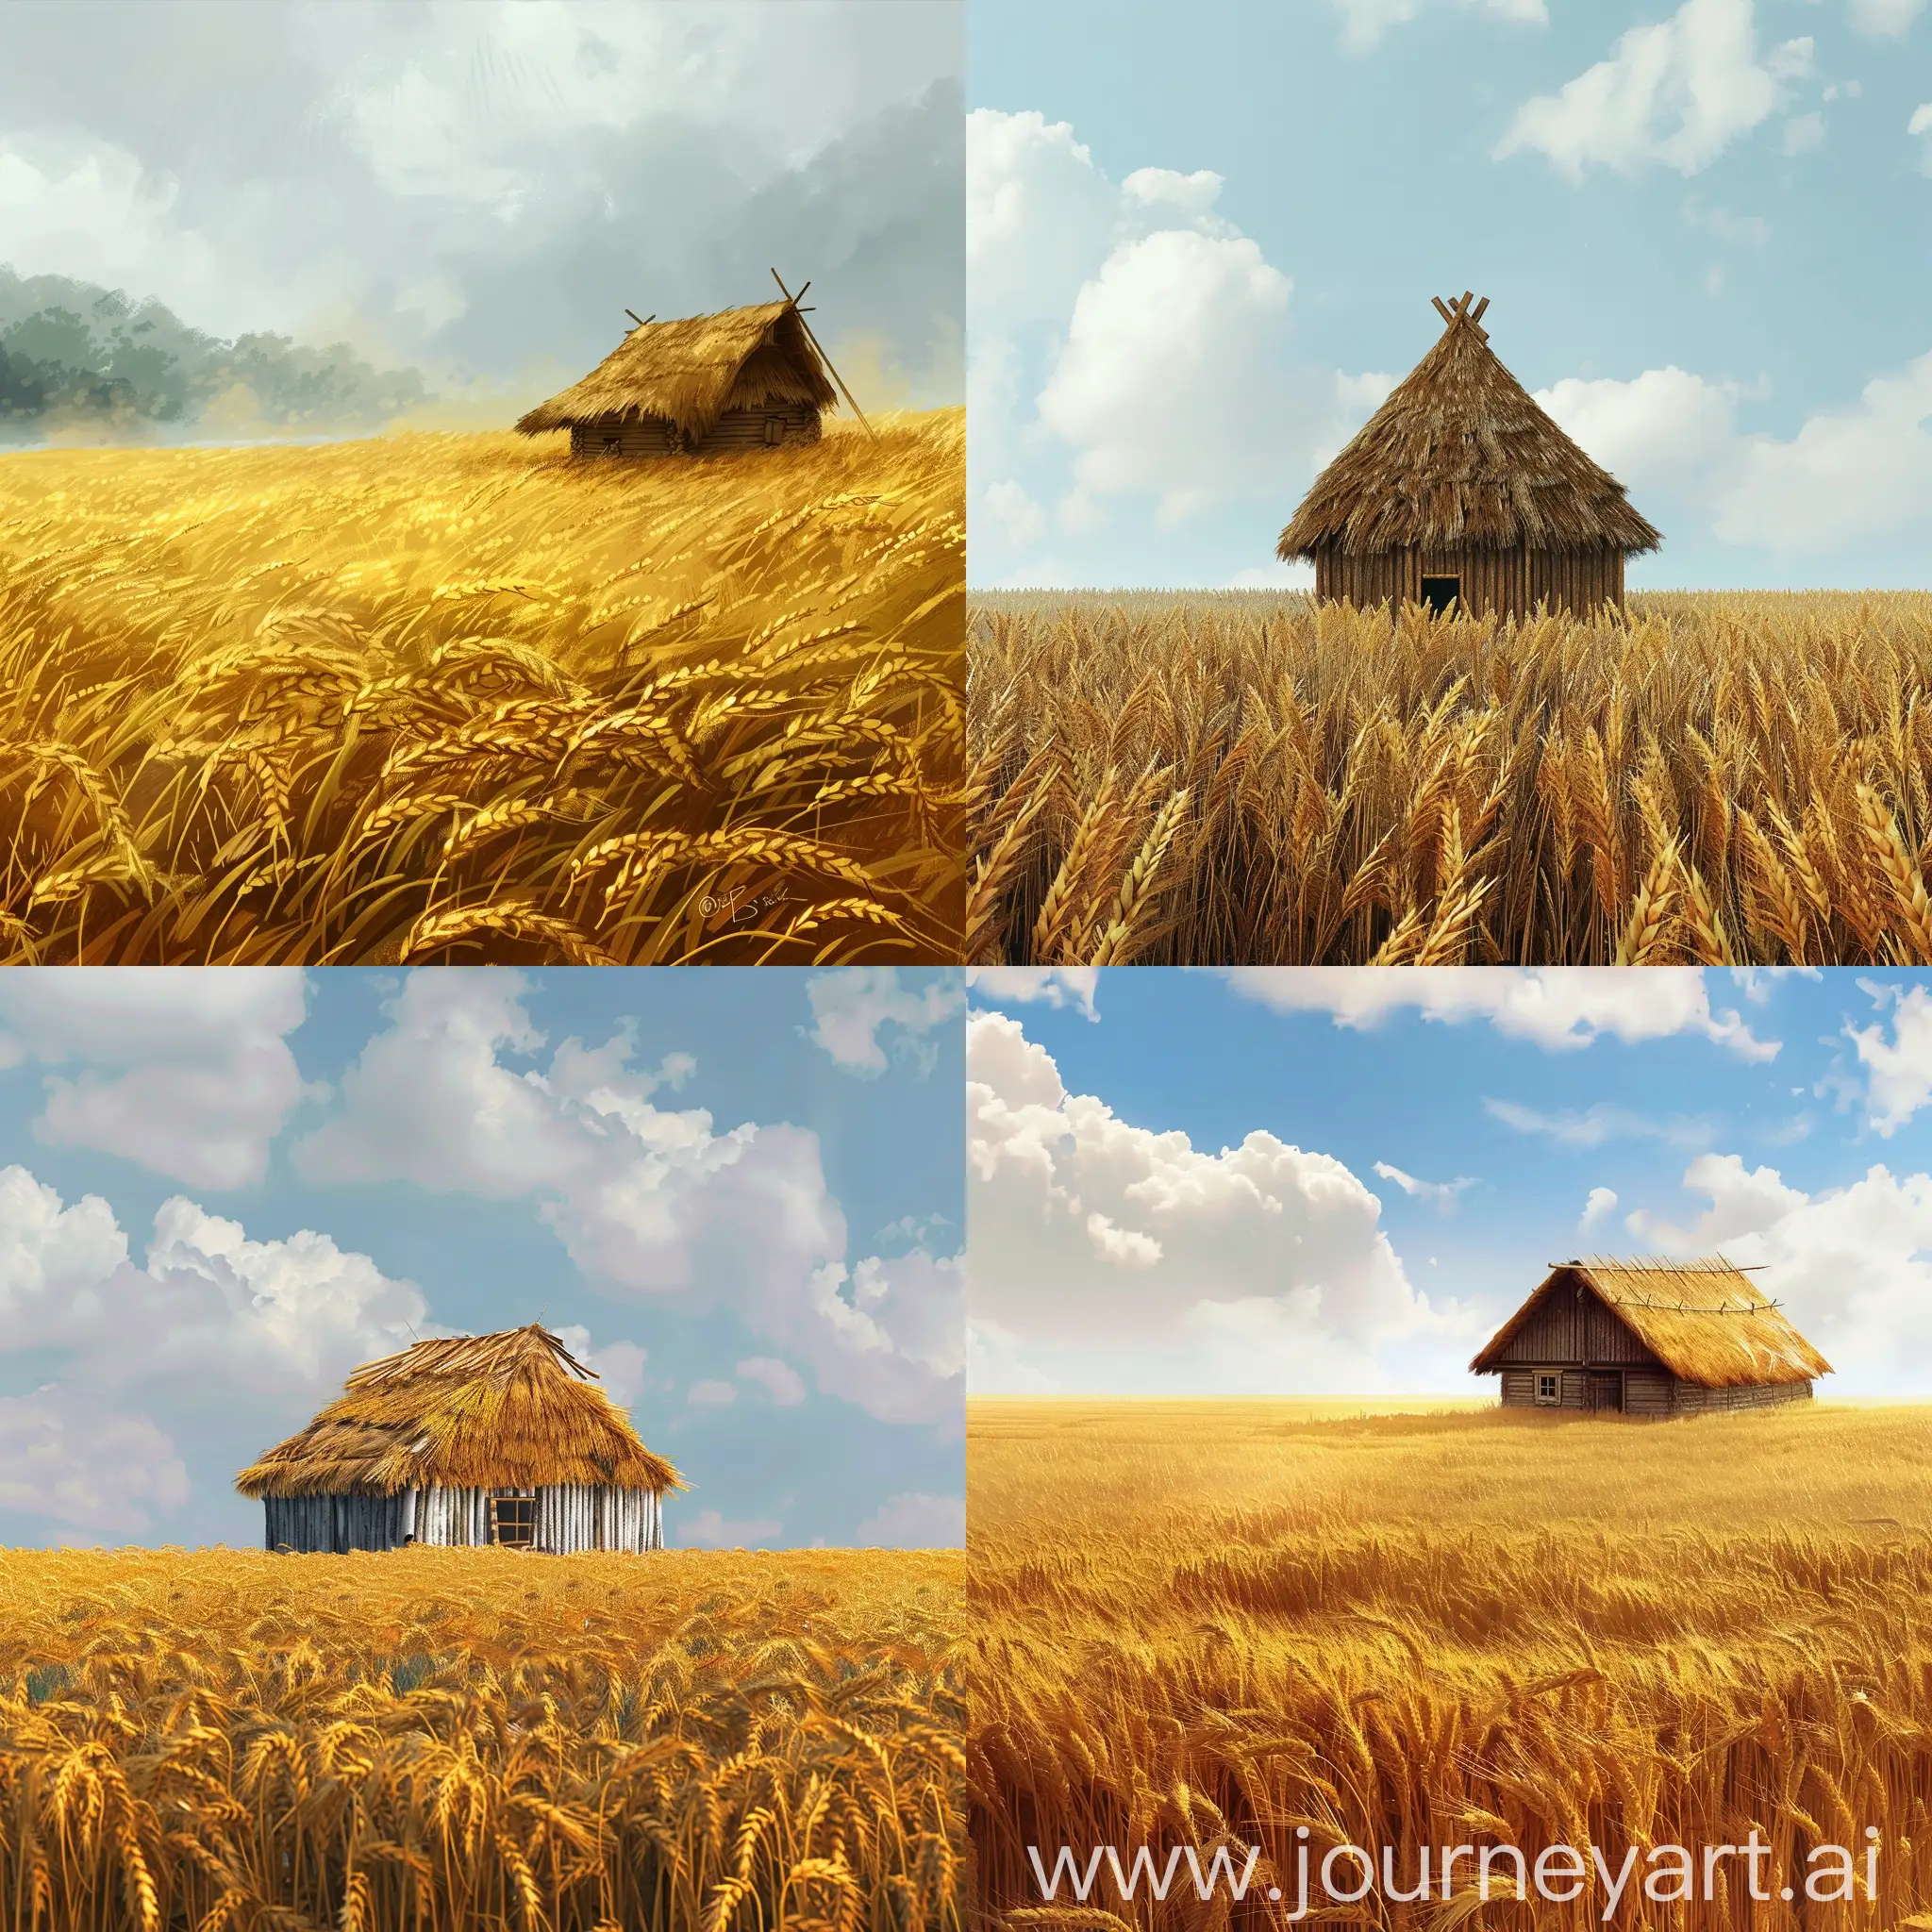 an story named "the straw bride". a simple hut surrounded by a wheat field, digital art